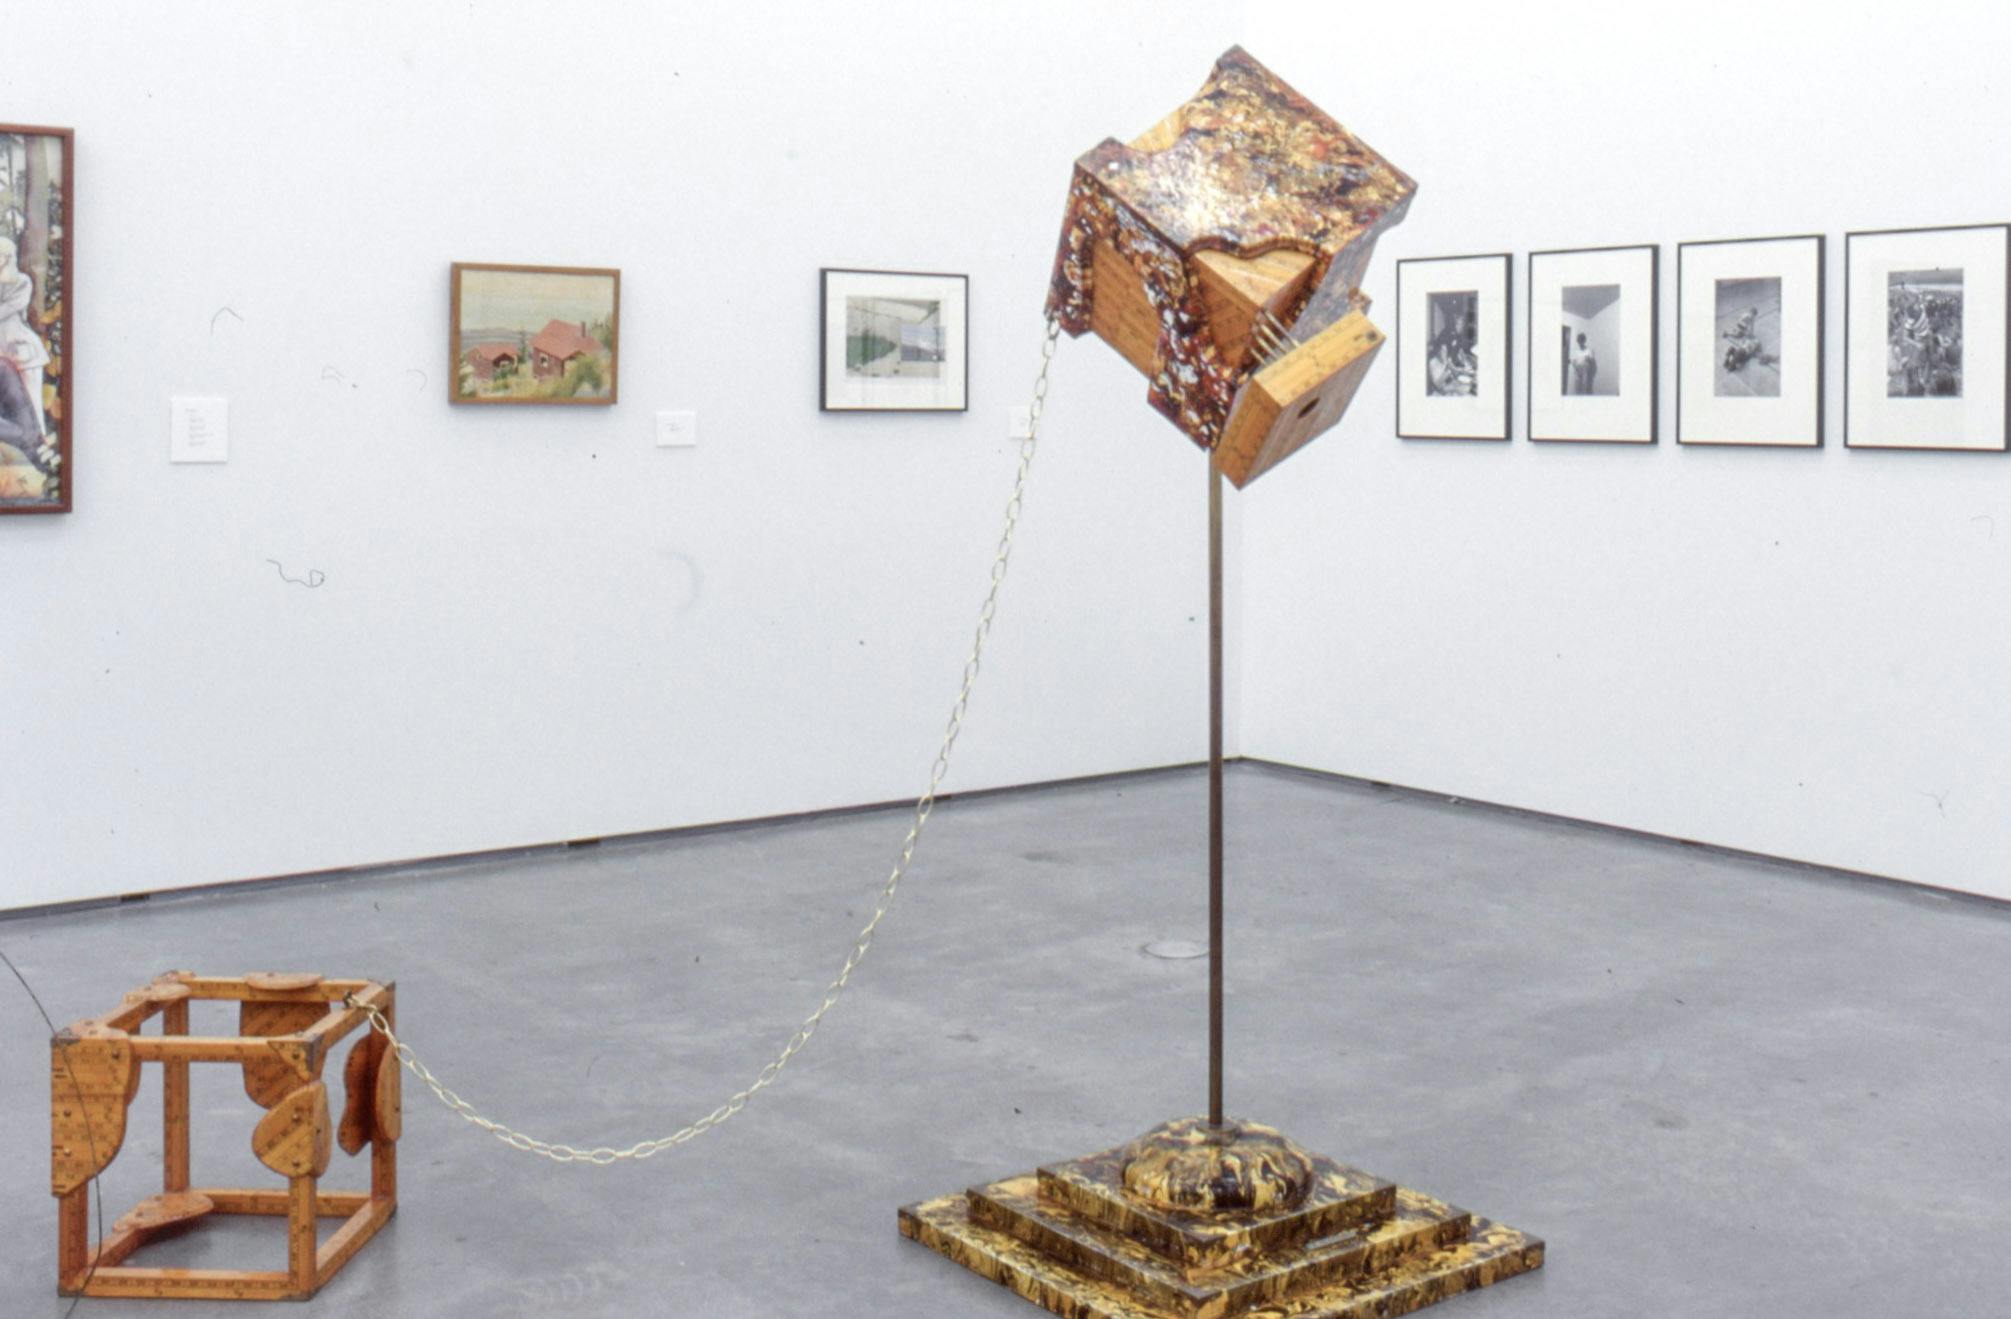 A tall sculpture is placed in the middle of the gallery floor. It has two cube shapes; one is on the floor and another in the air supported by a thin leg. These two cubes are connected with a chain.